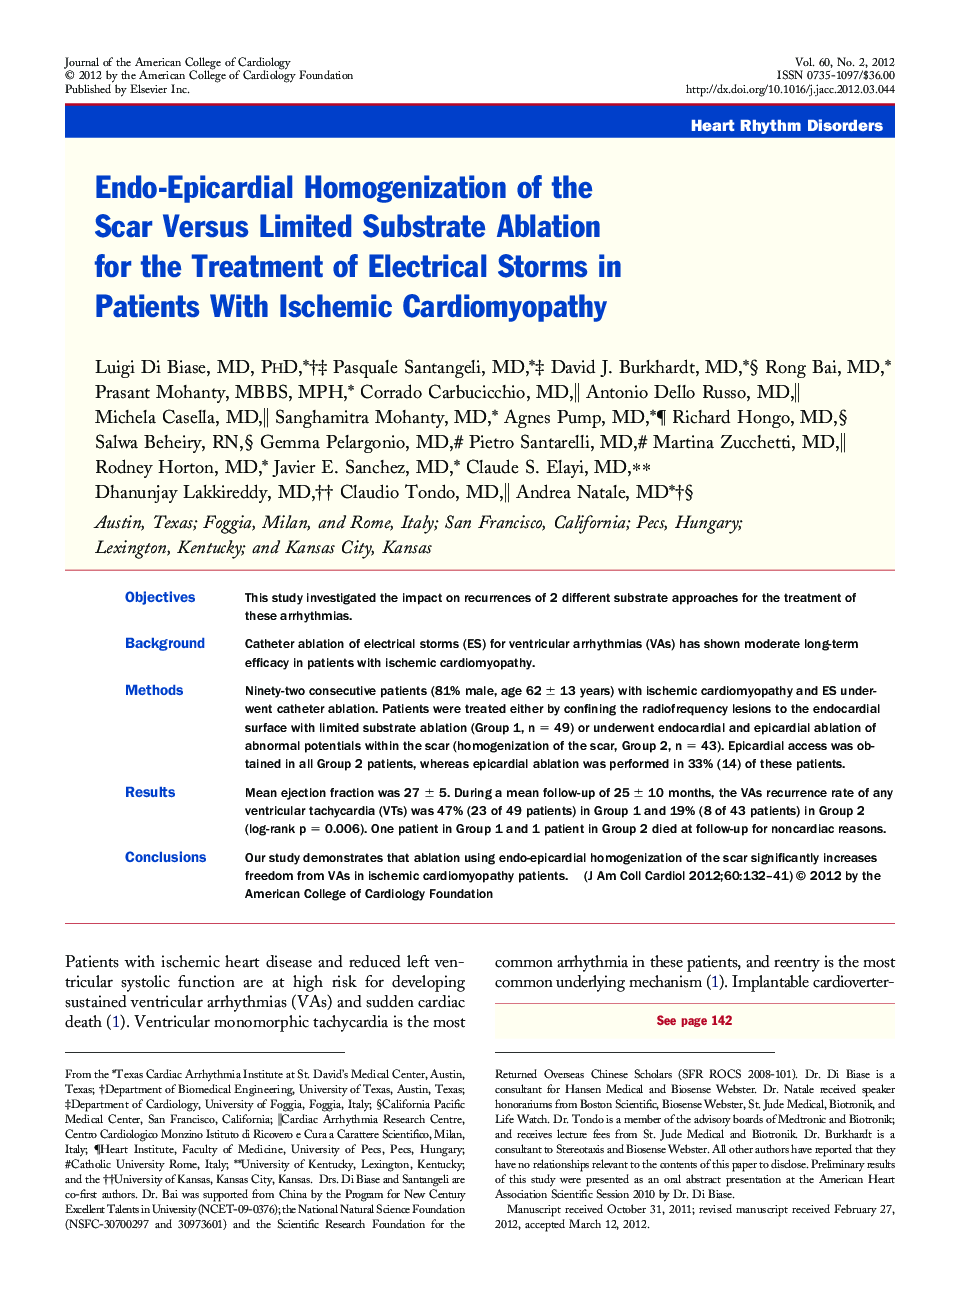 Endo-Epicardial Homogenization of the Scar Versus Limited Substrate Ablation for the Treatment of Electrical Storms in Patients With Ischemic Cardiomyopathy 